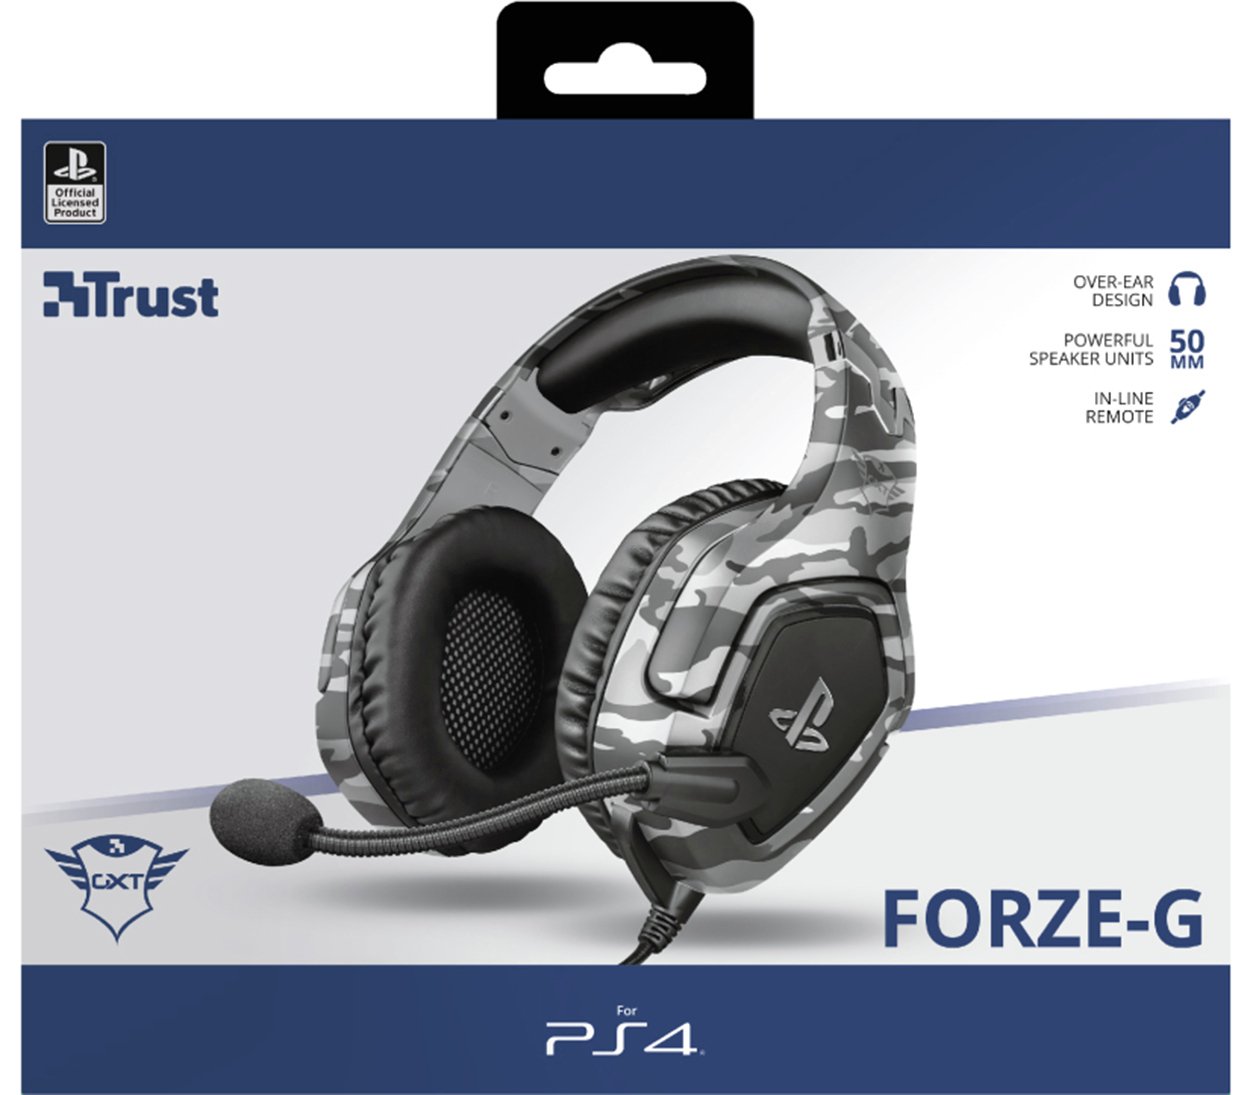 Trust GXT488 Forze G PS4, Xbox One, PC, Headset Review